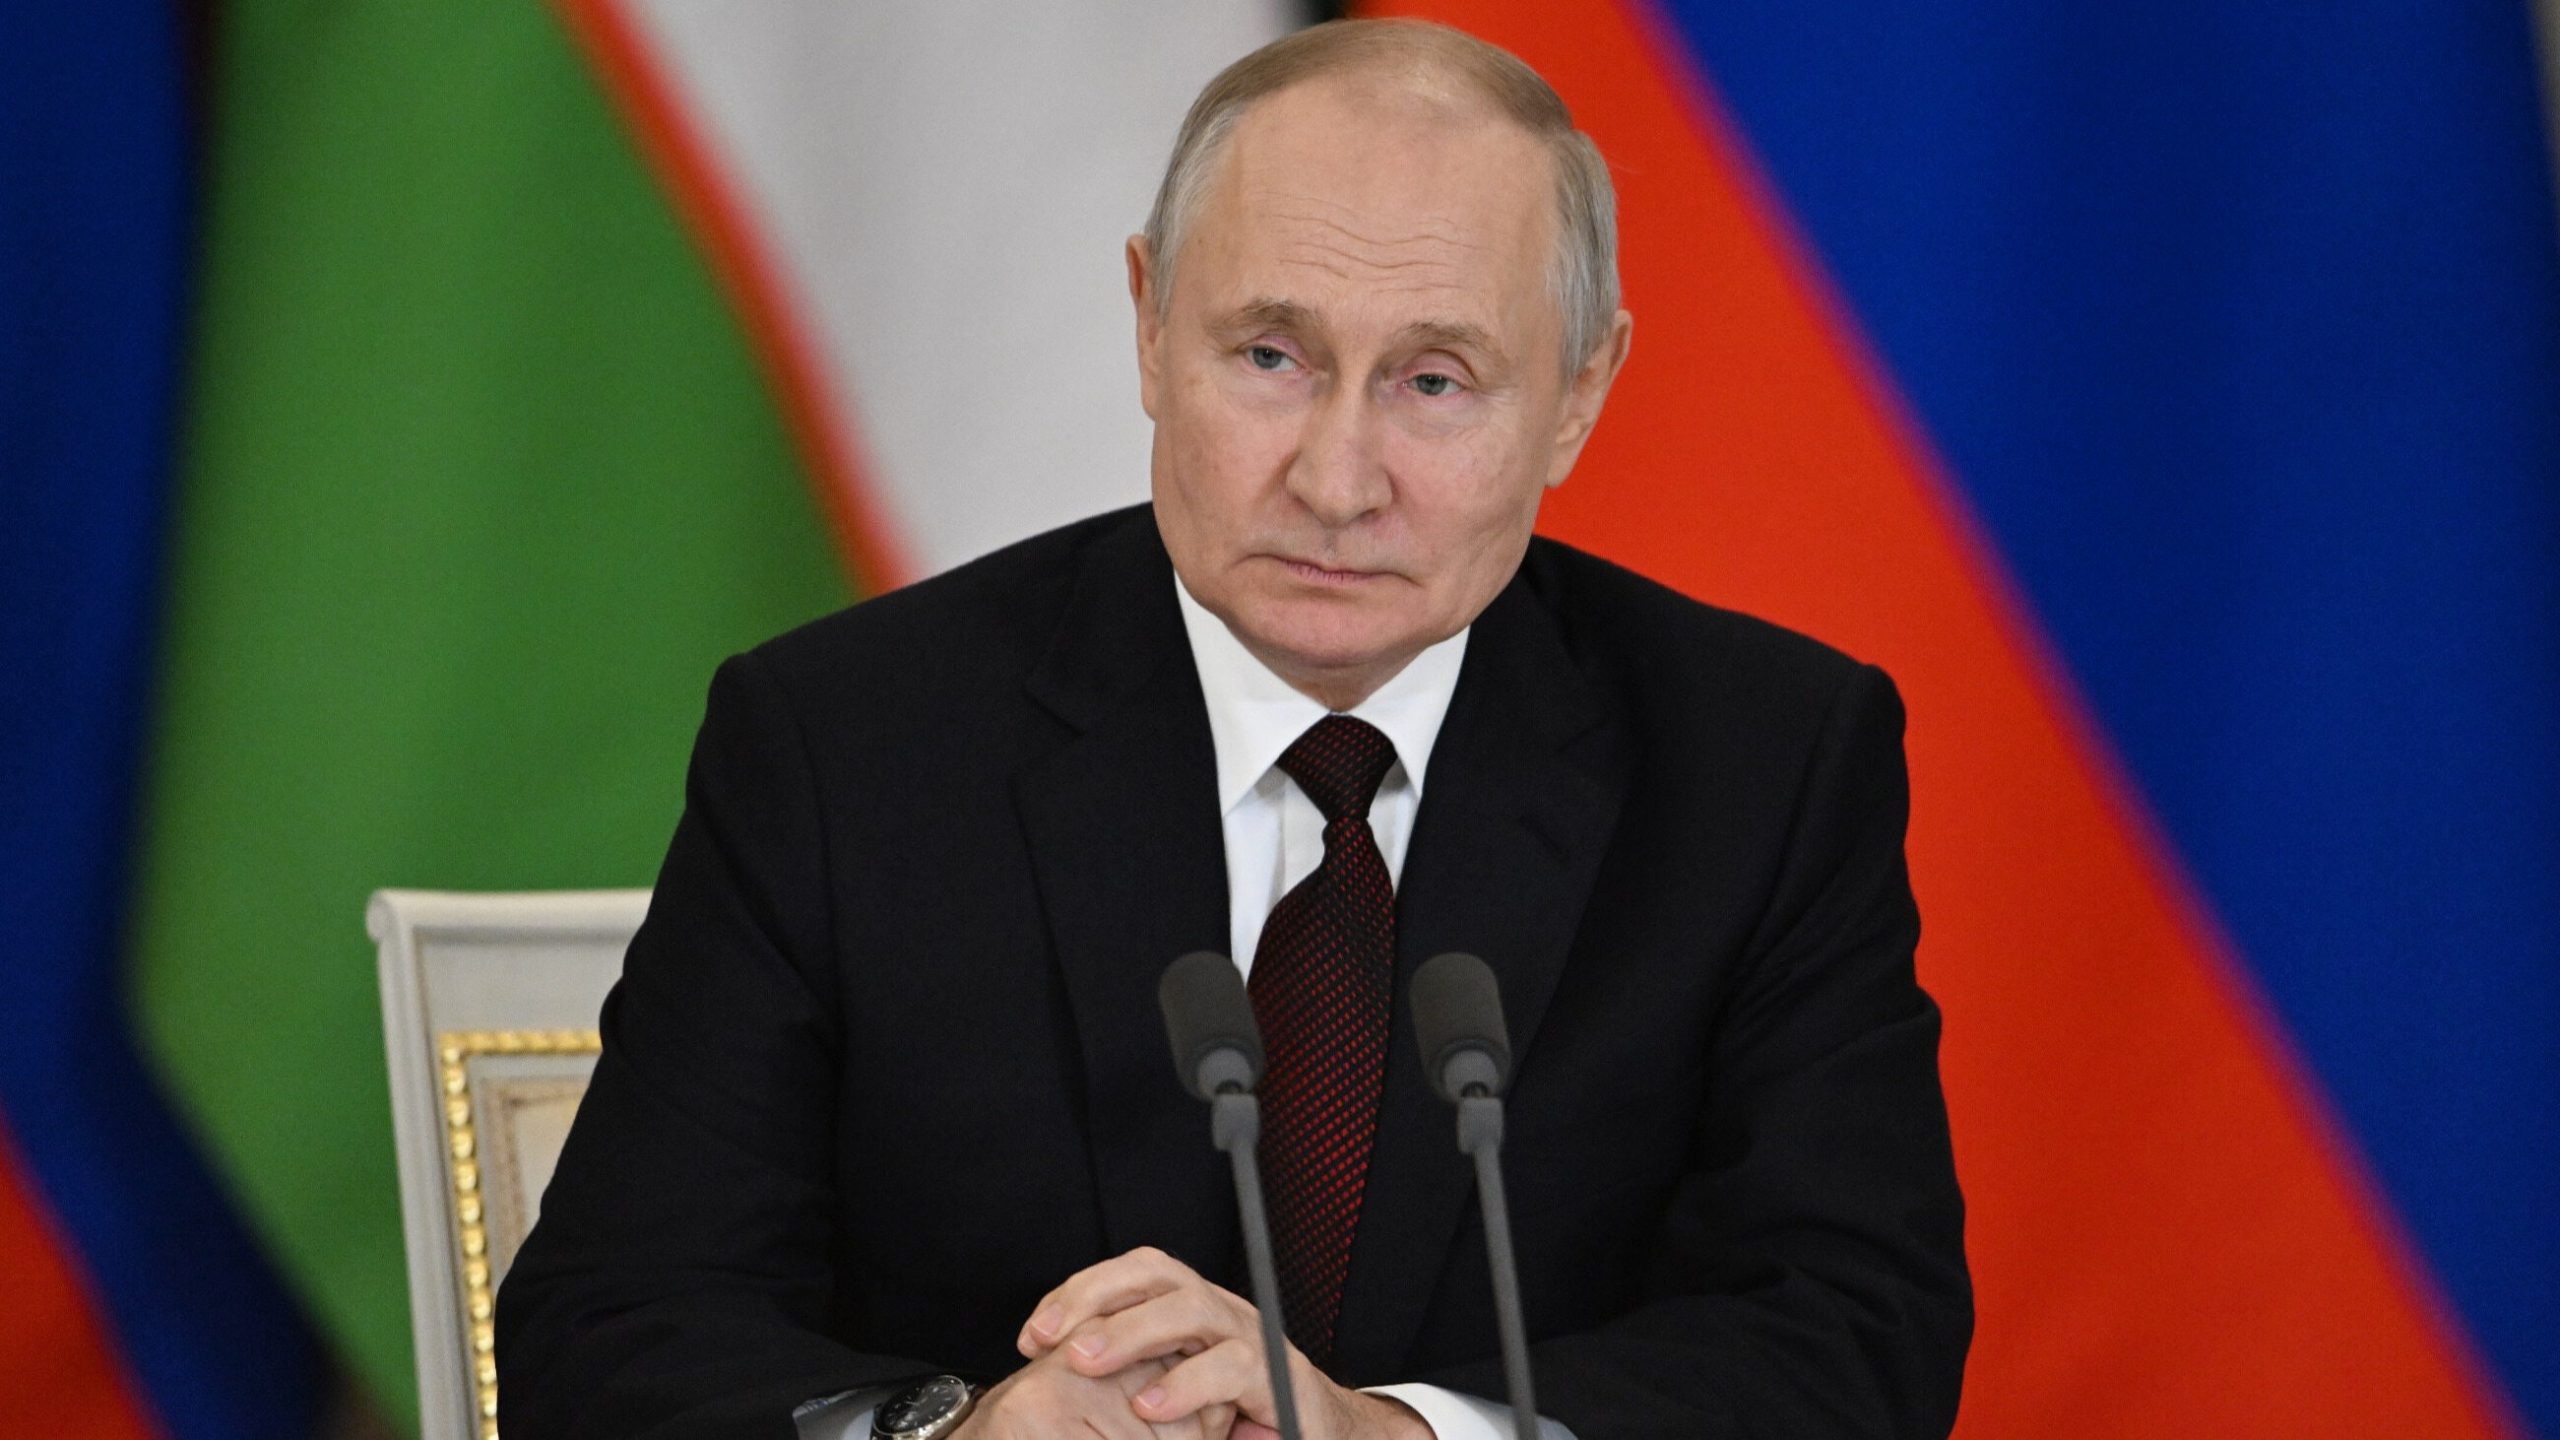 Putin himself dealt a symbolic blow to himself.  "He's actually already dead."